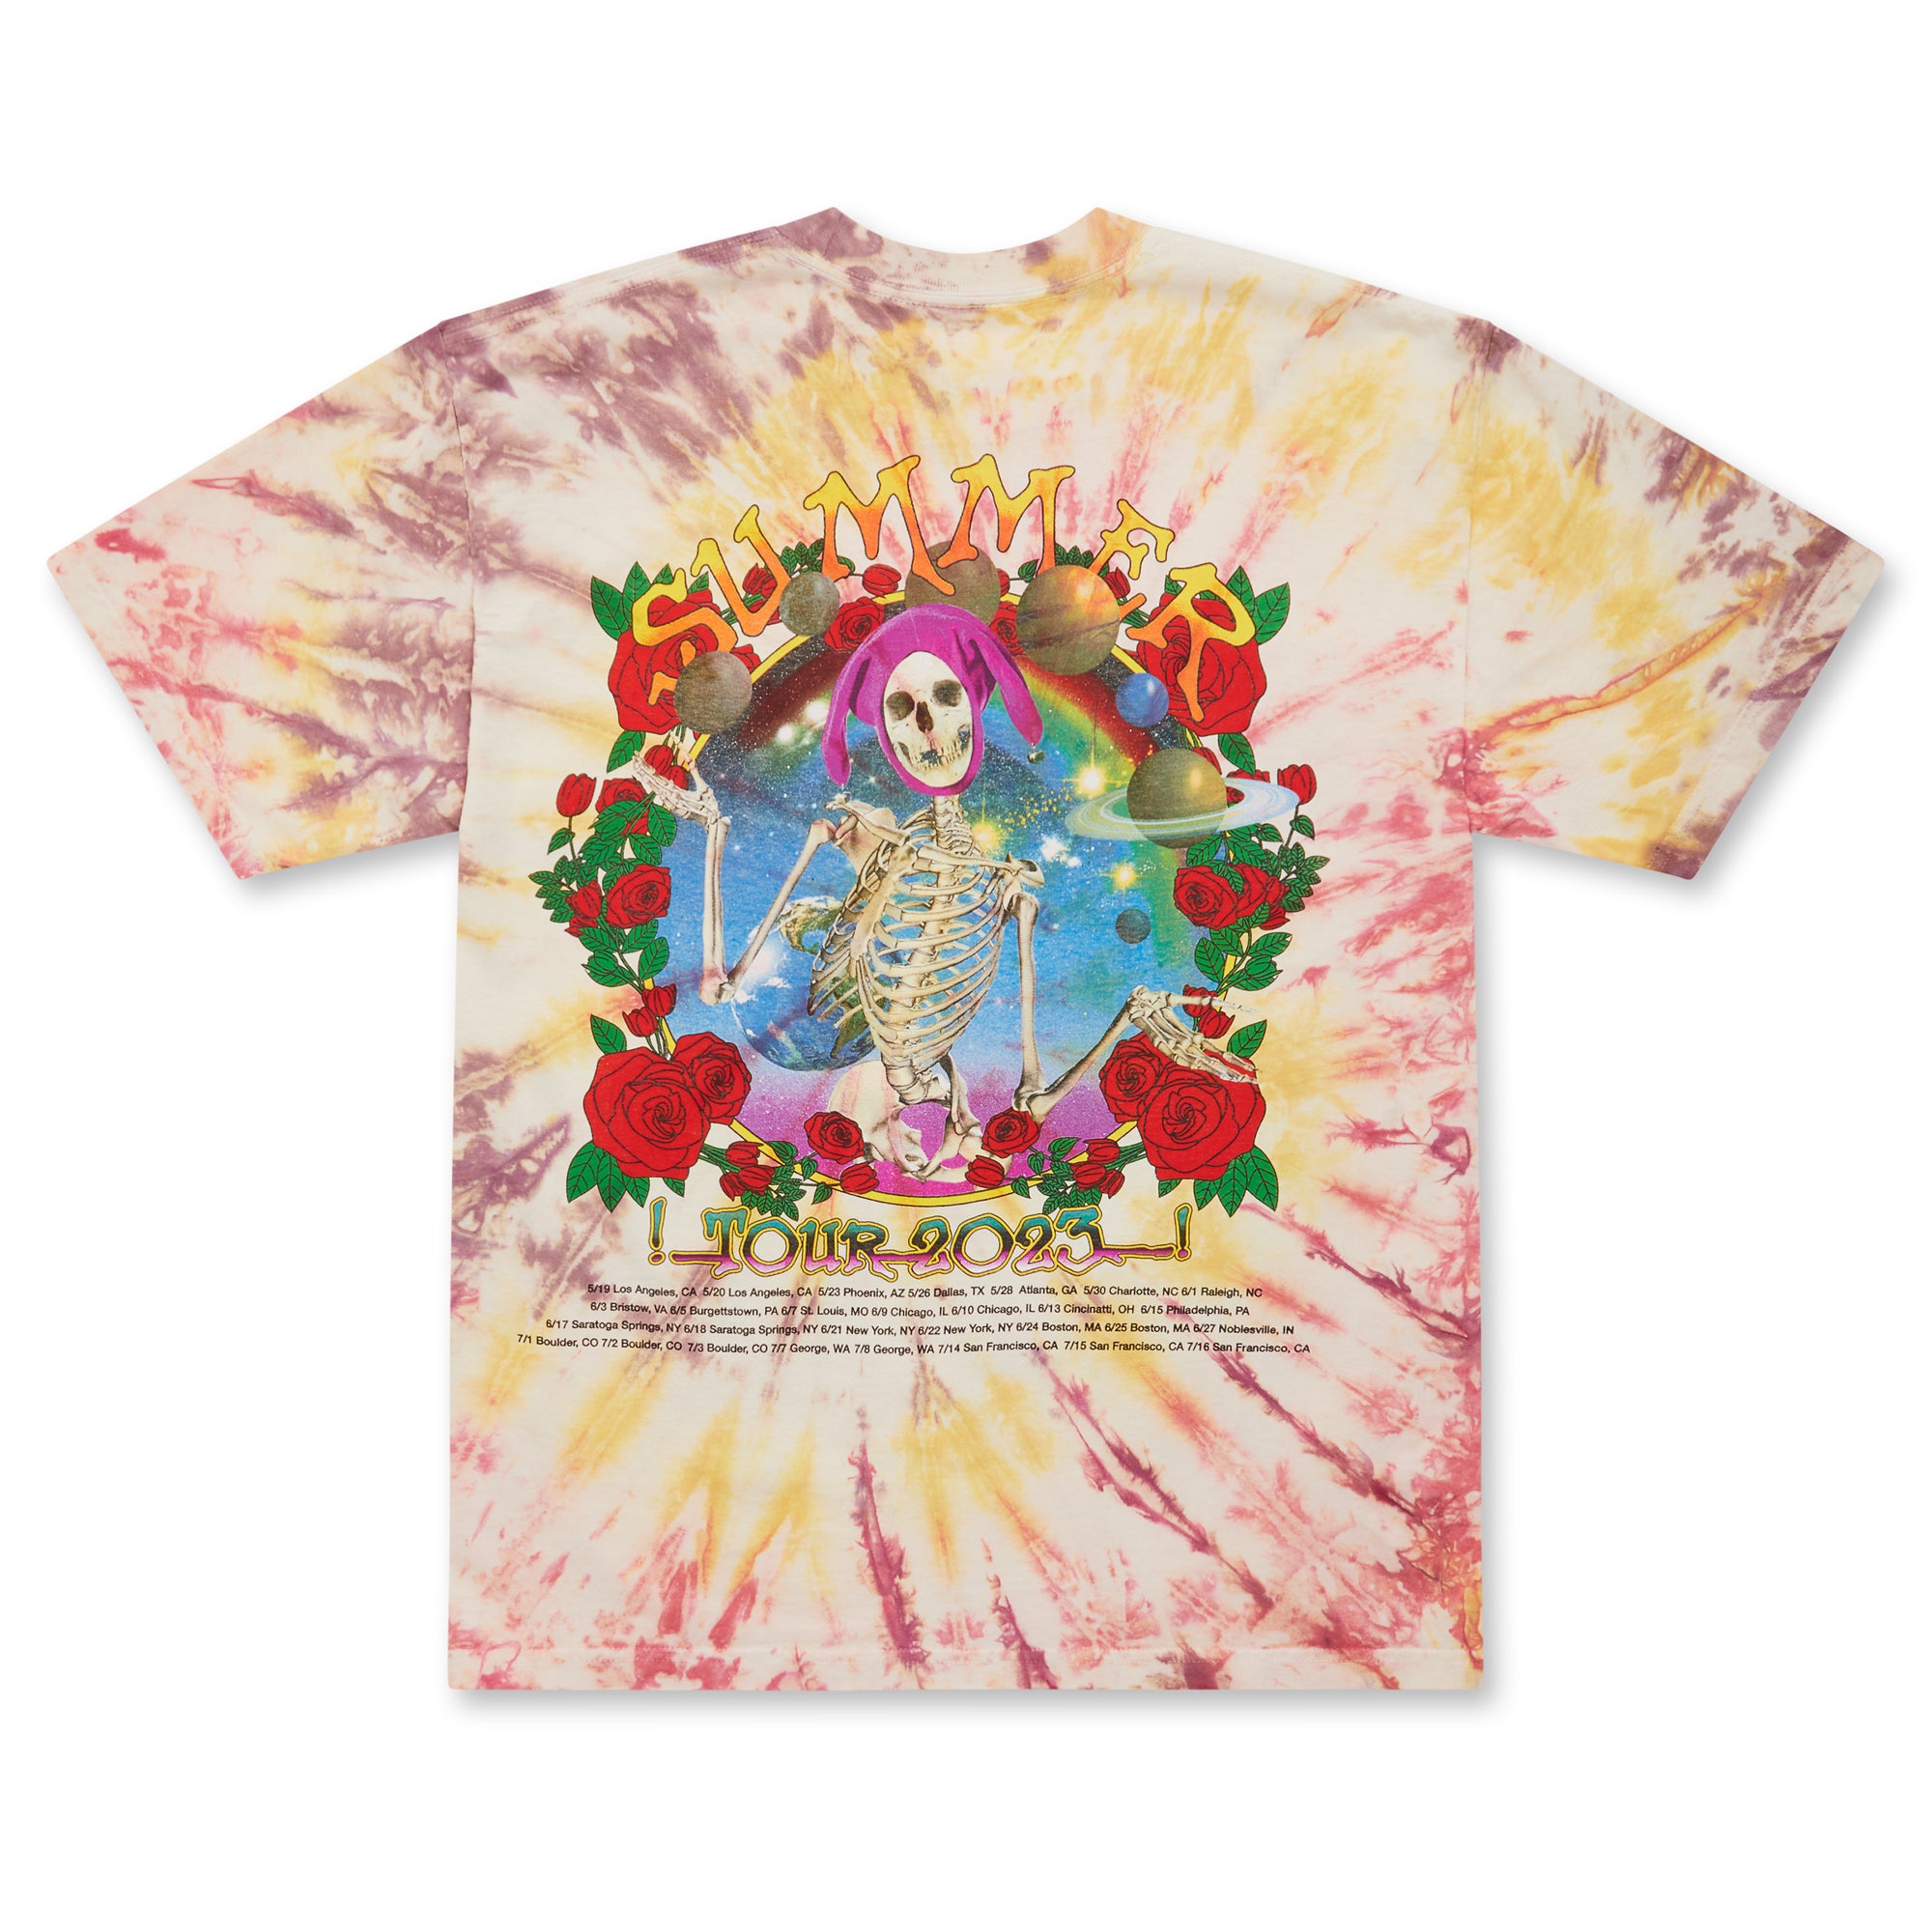 Online Ceramics - Grateful For The Company Tee - (Tie-Dye) view 2